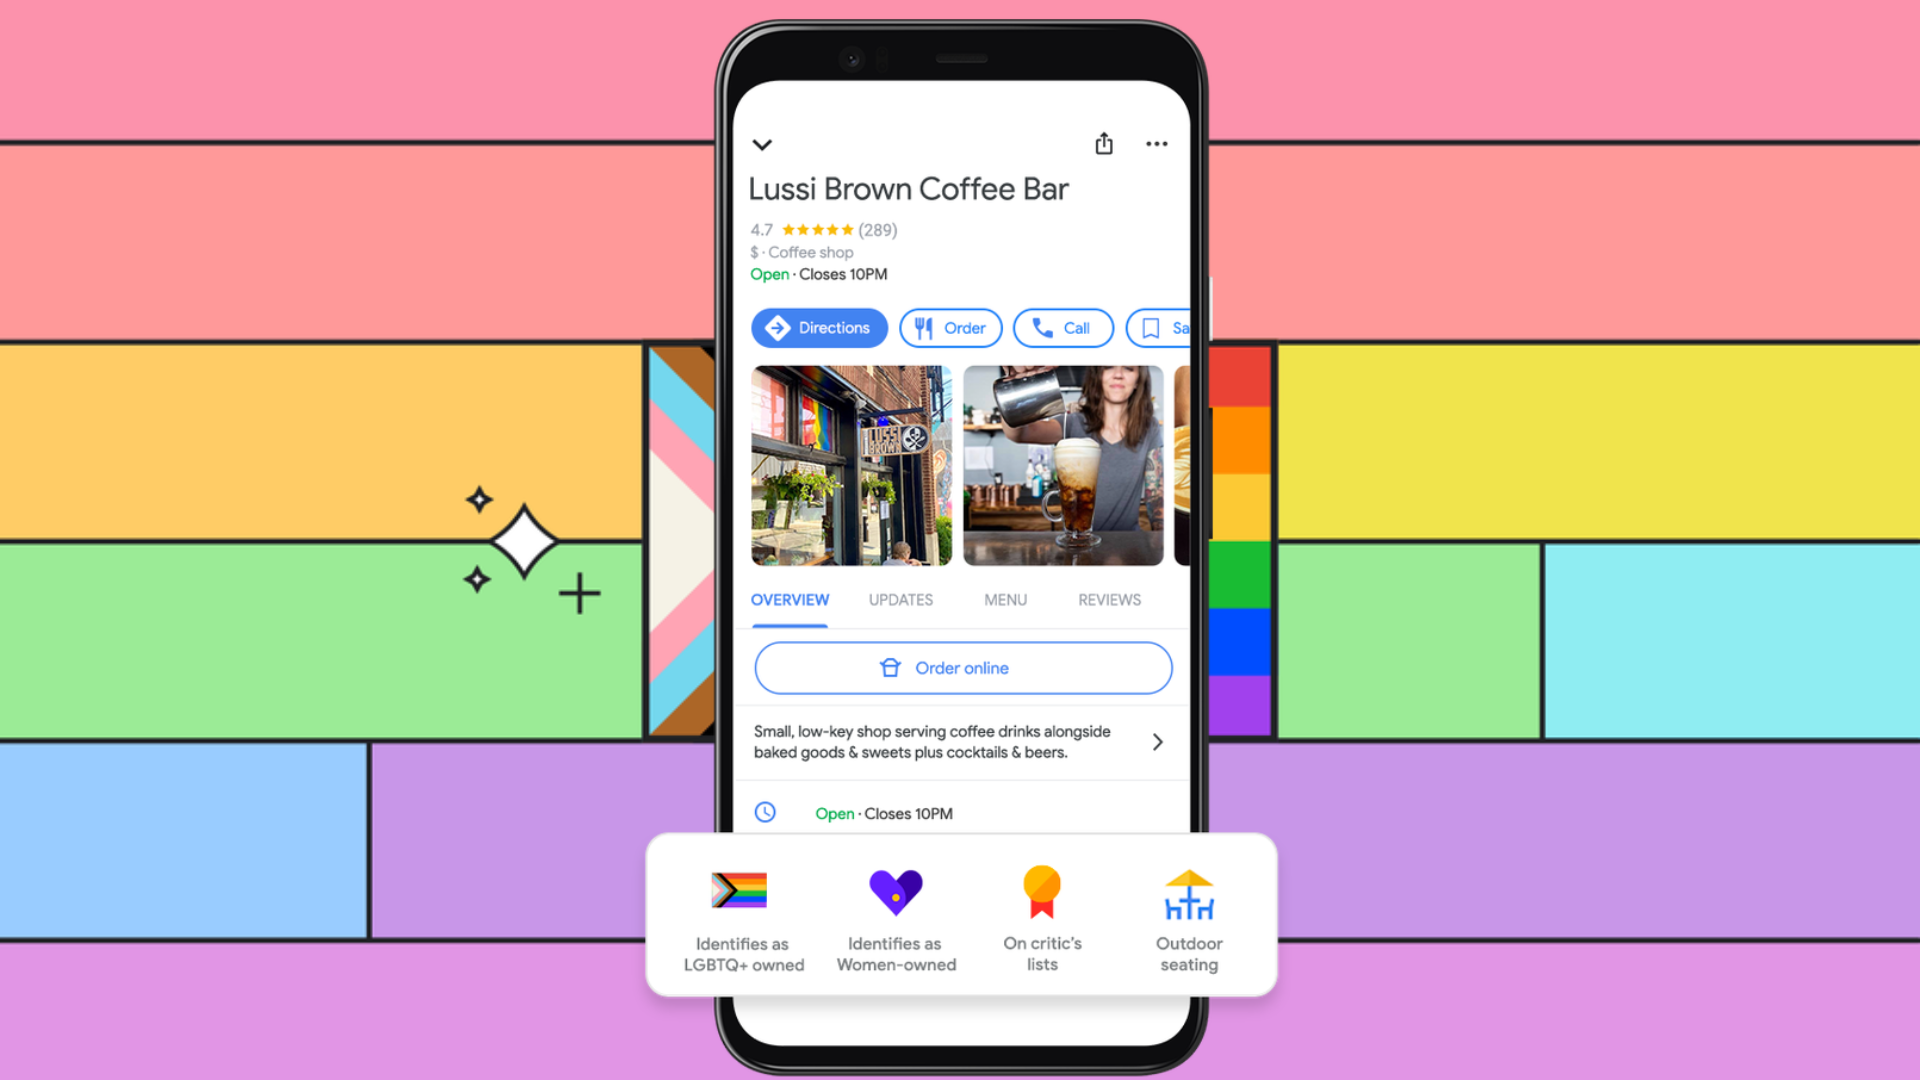 A business using the new LGBTQ+ owned tag on Google Maps